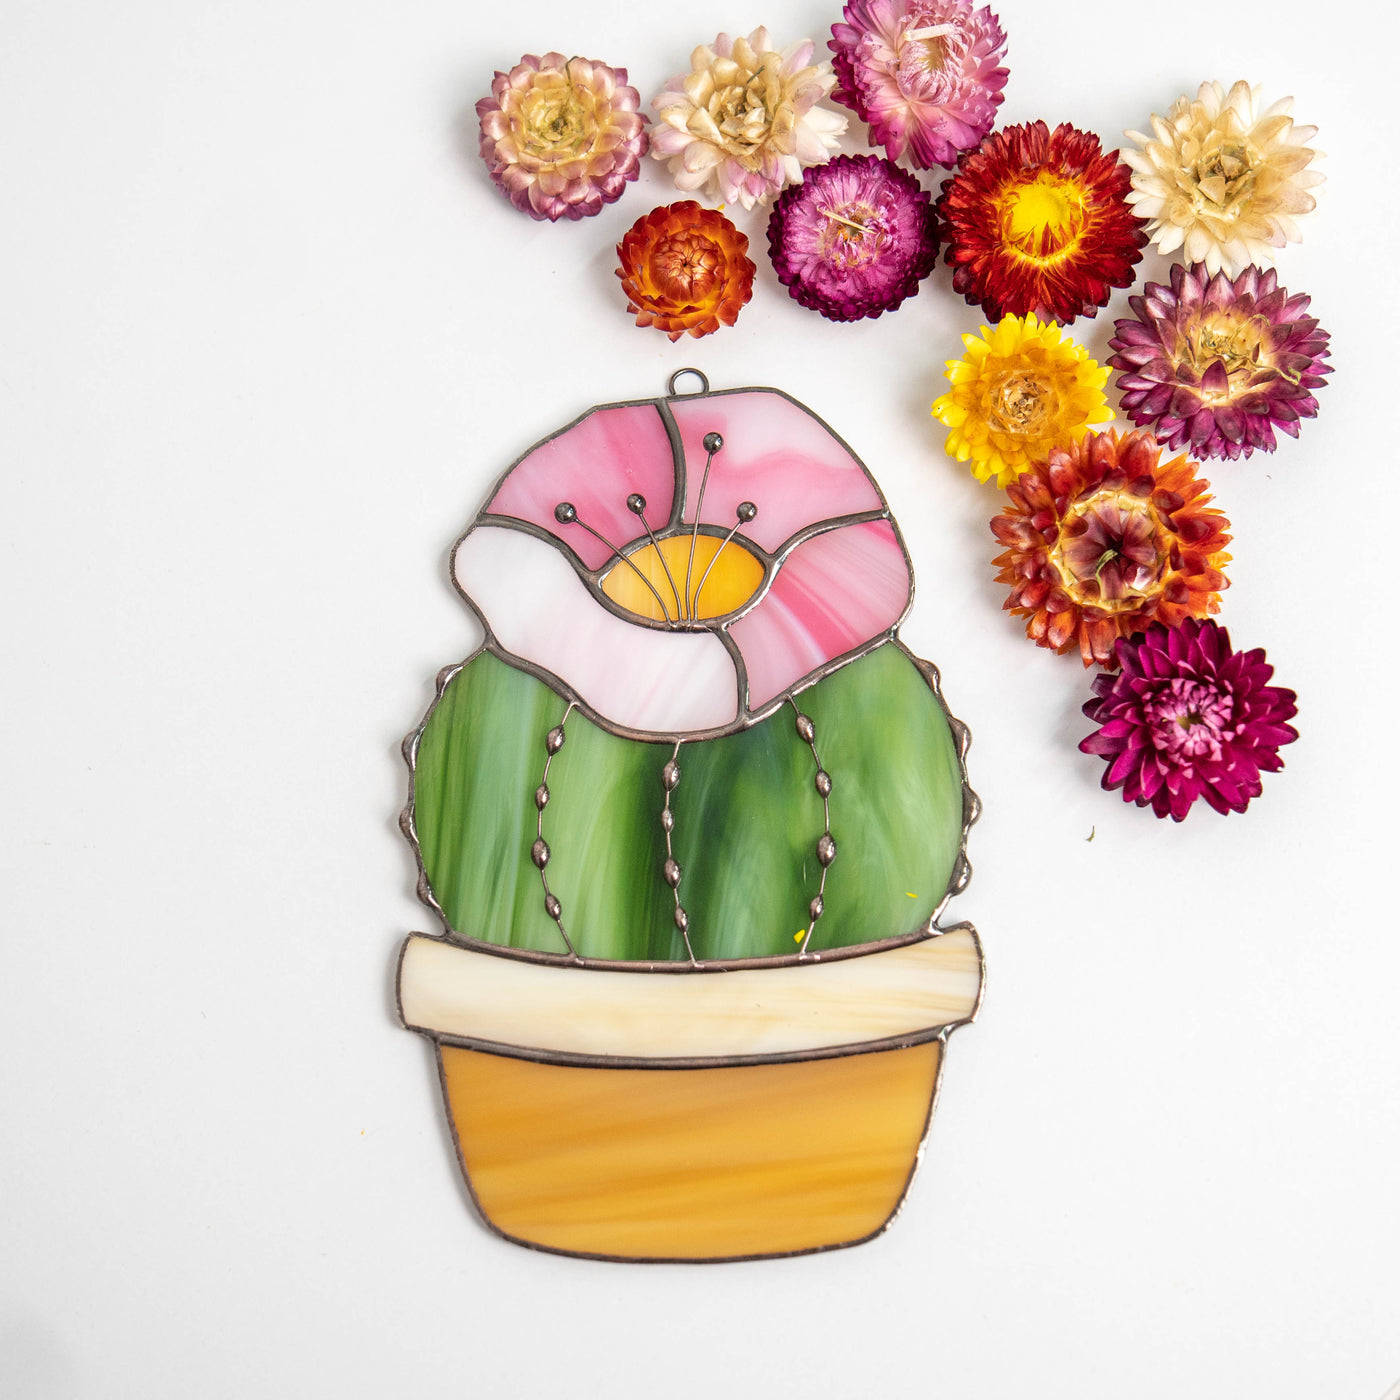 Cactus stained glass suncatcher with pink flower on top